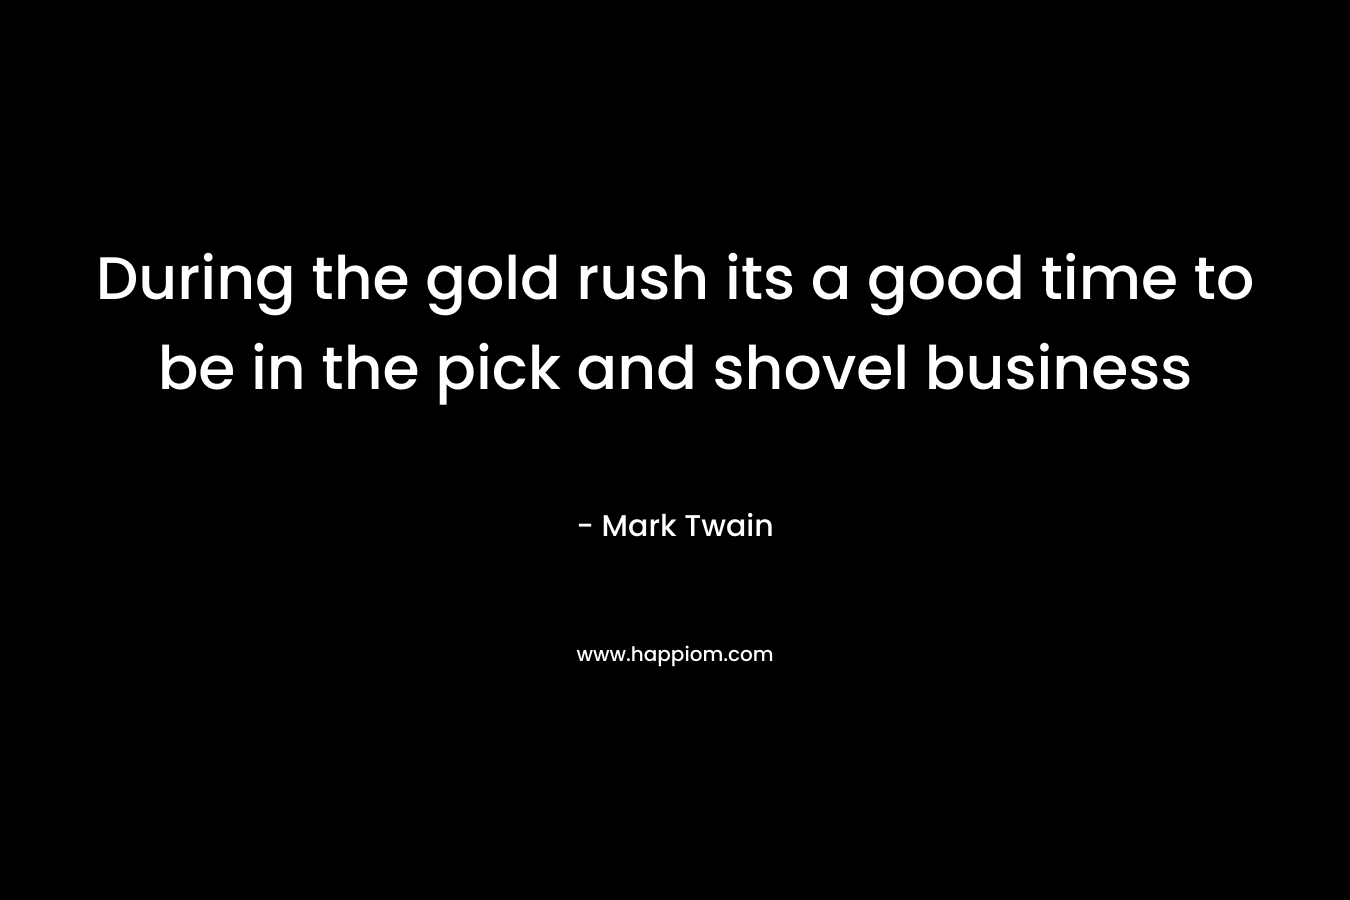 During the gold rush its a good time to be in the pick and shovel business